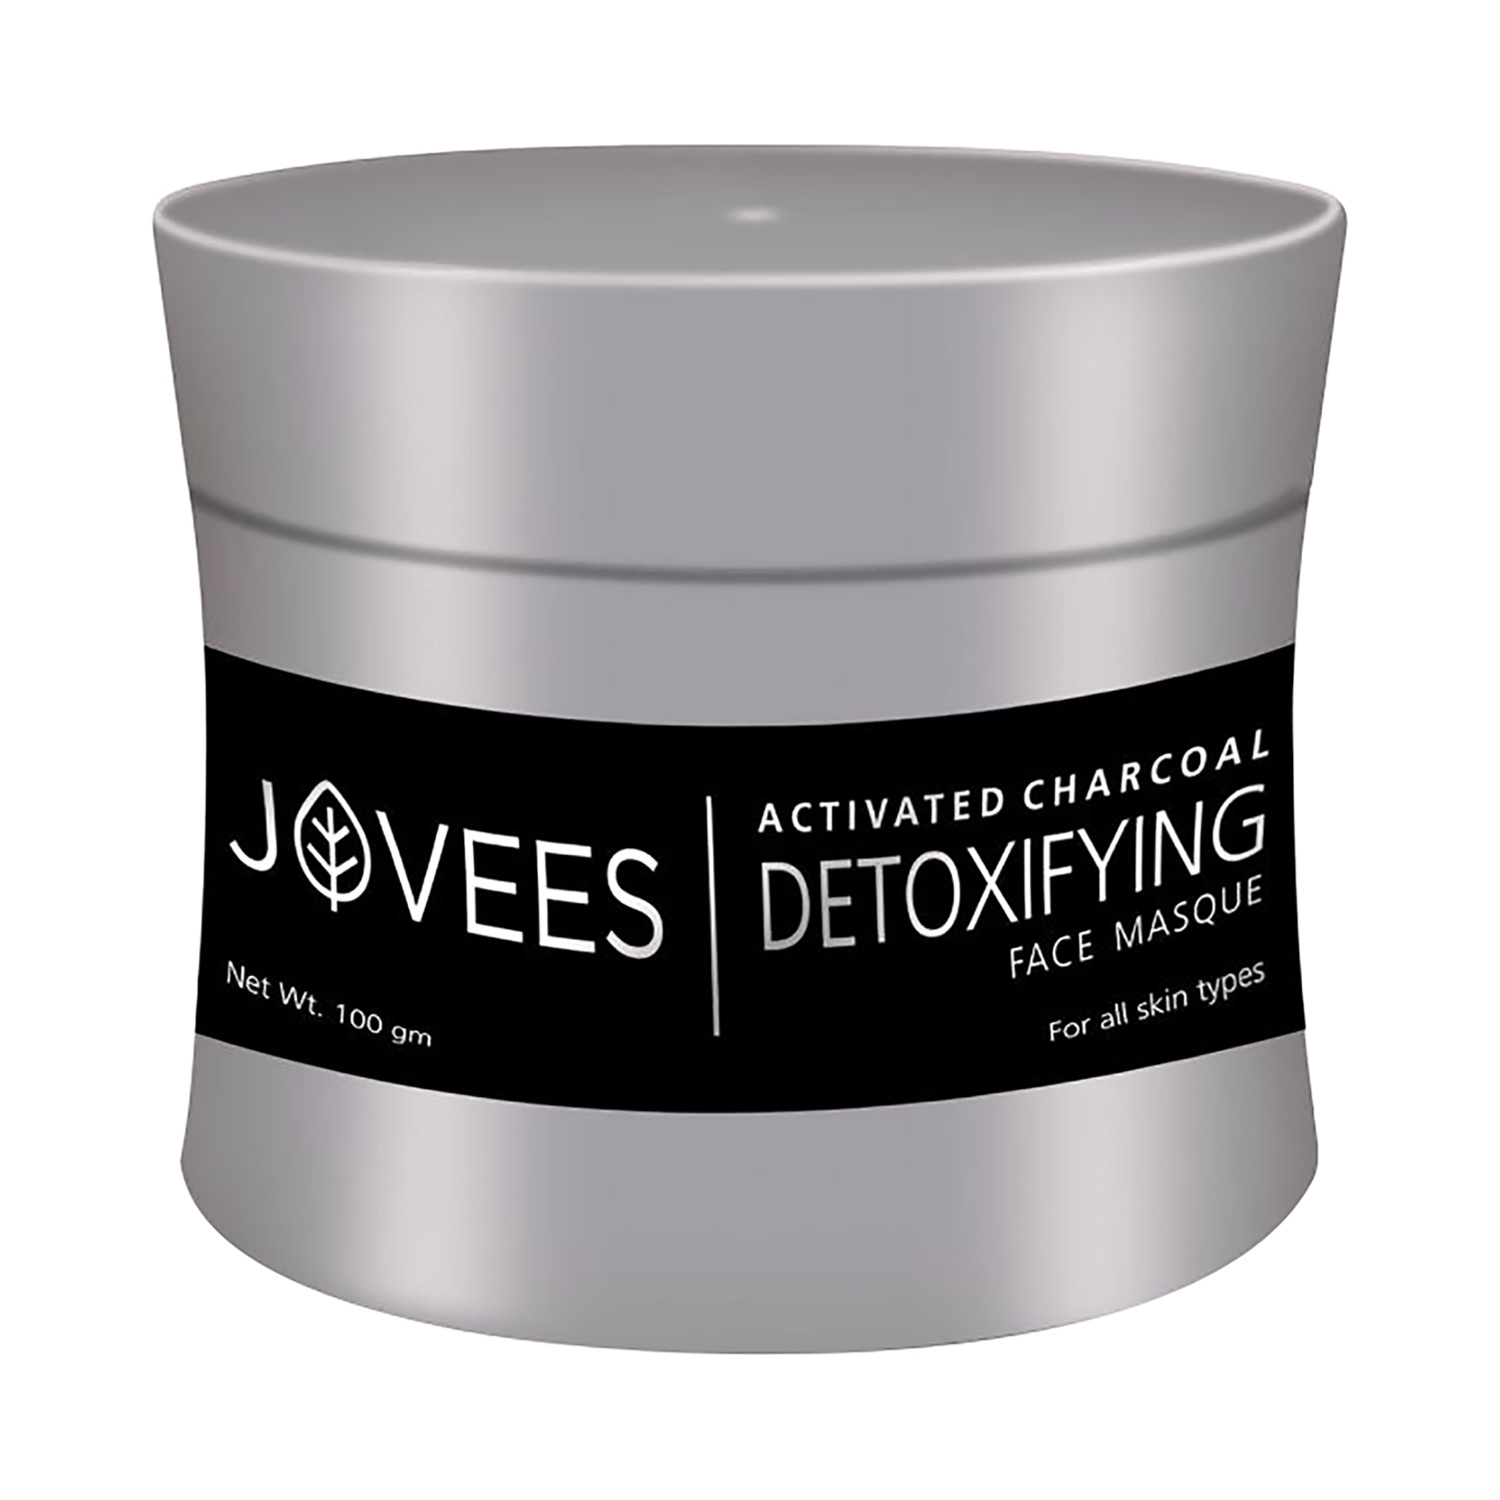 Jovees | Jovees Activated Charcoal Detoxifying Face Masque (100g)